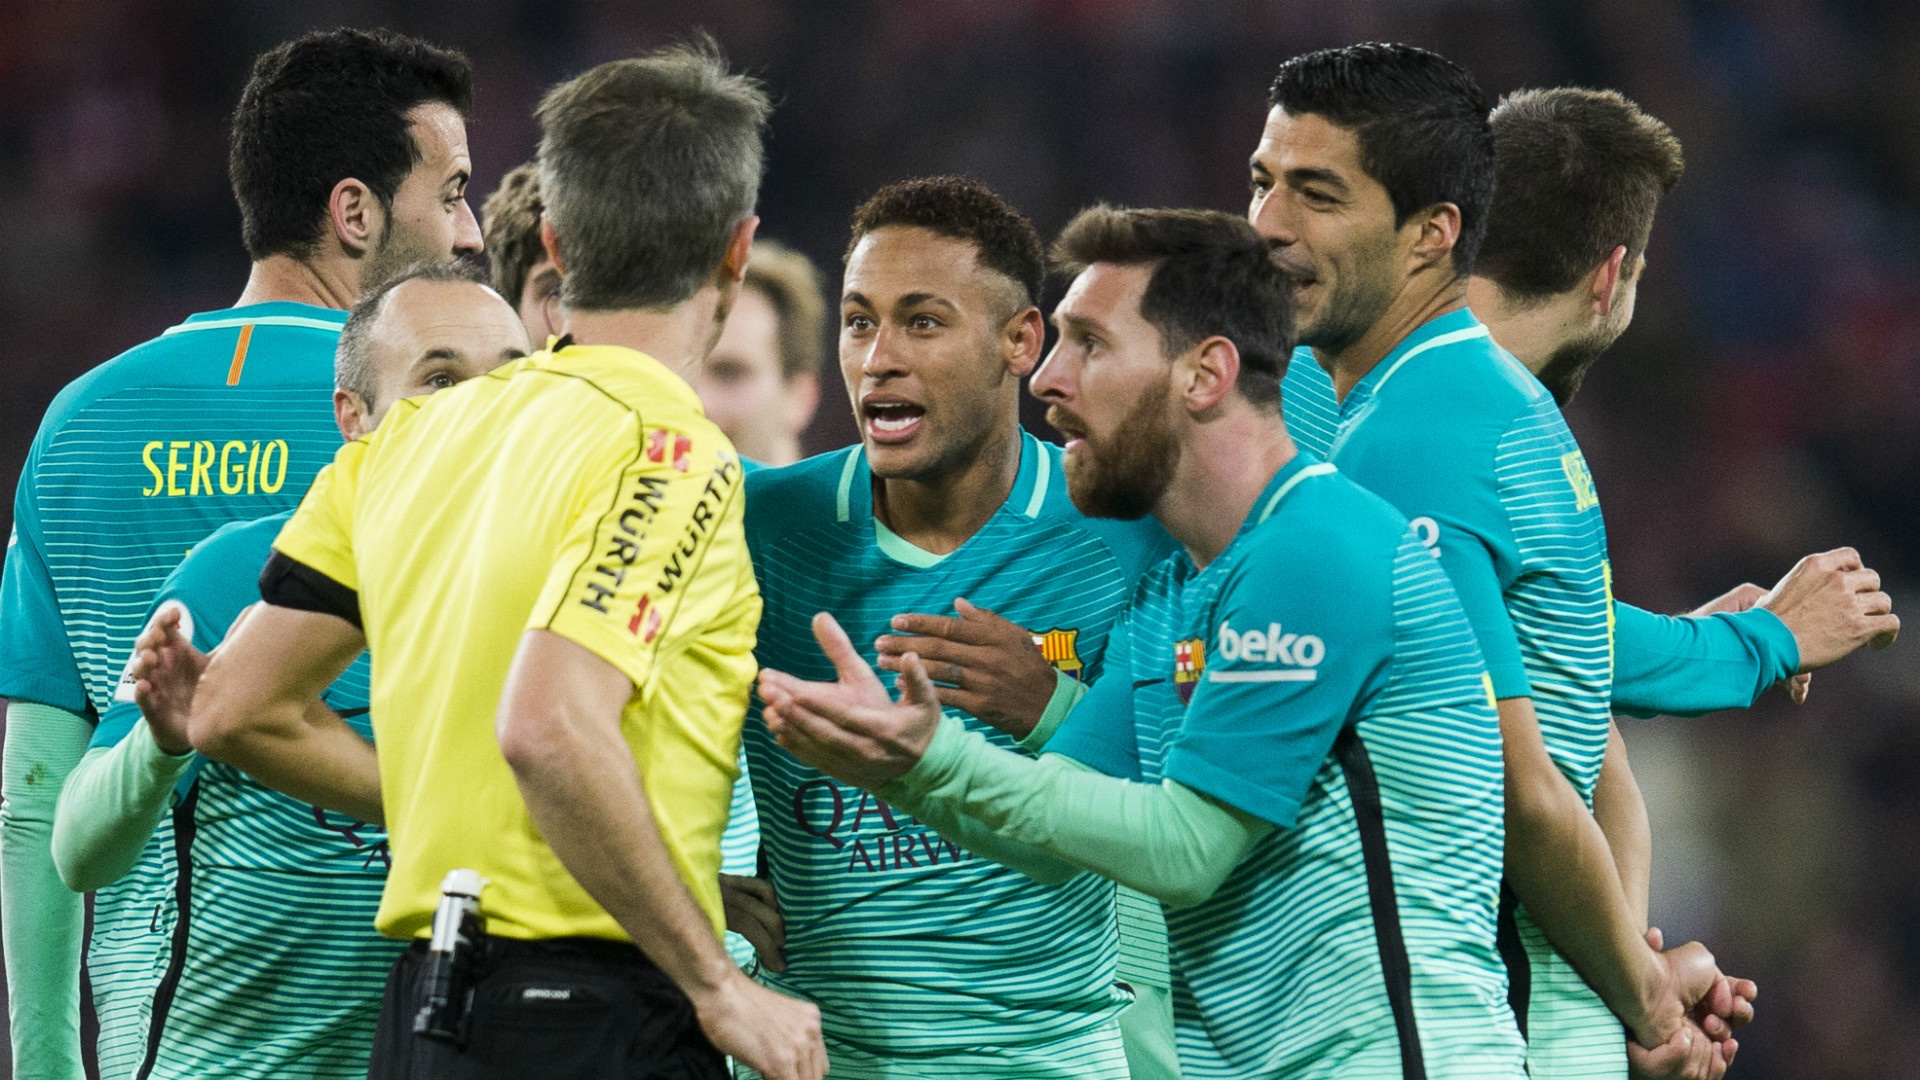 'They need help' - Luis Enrique defends officials